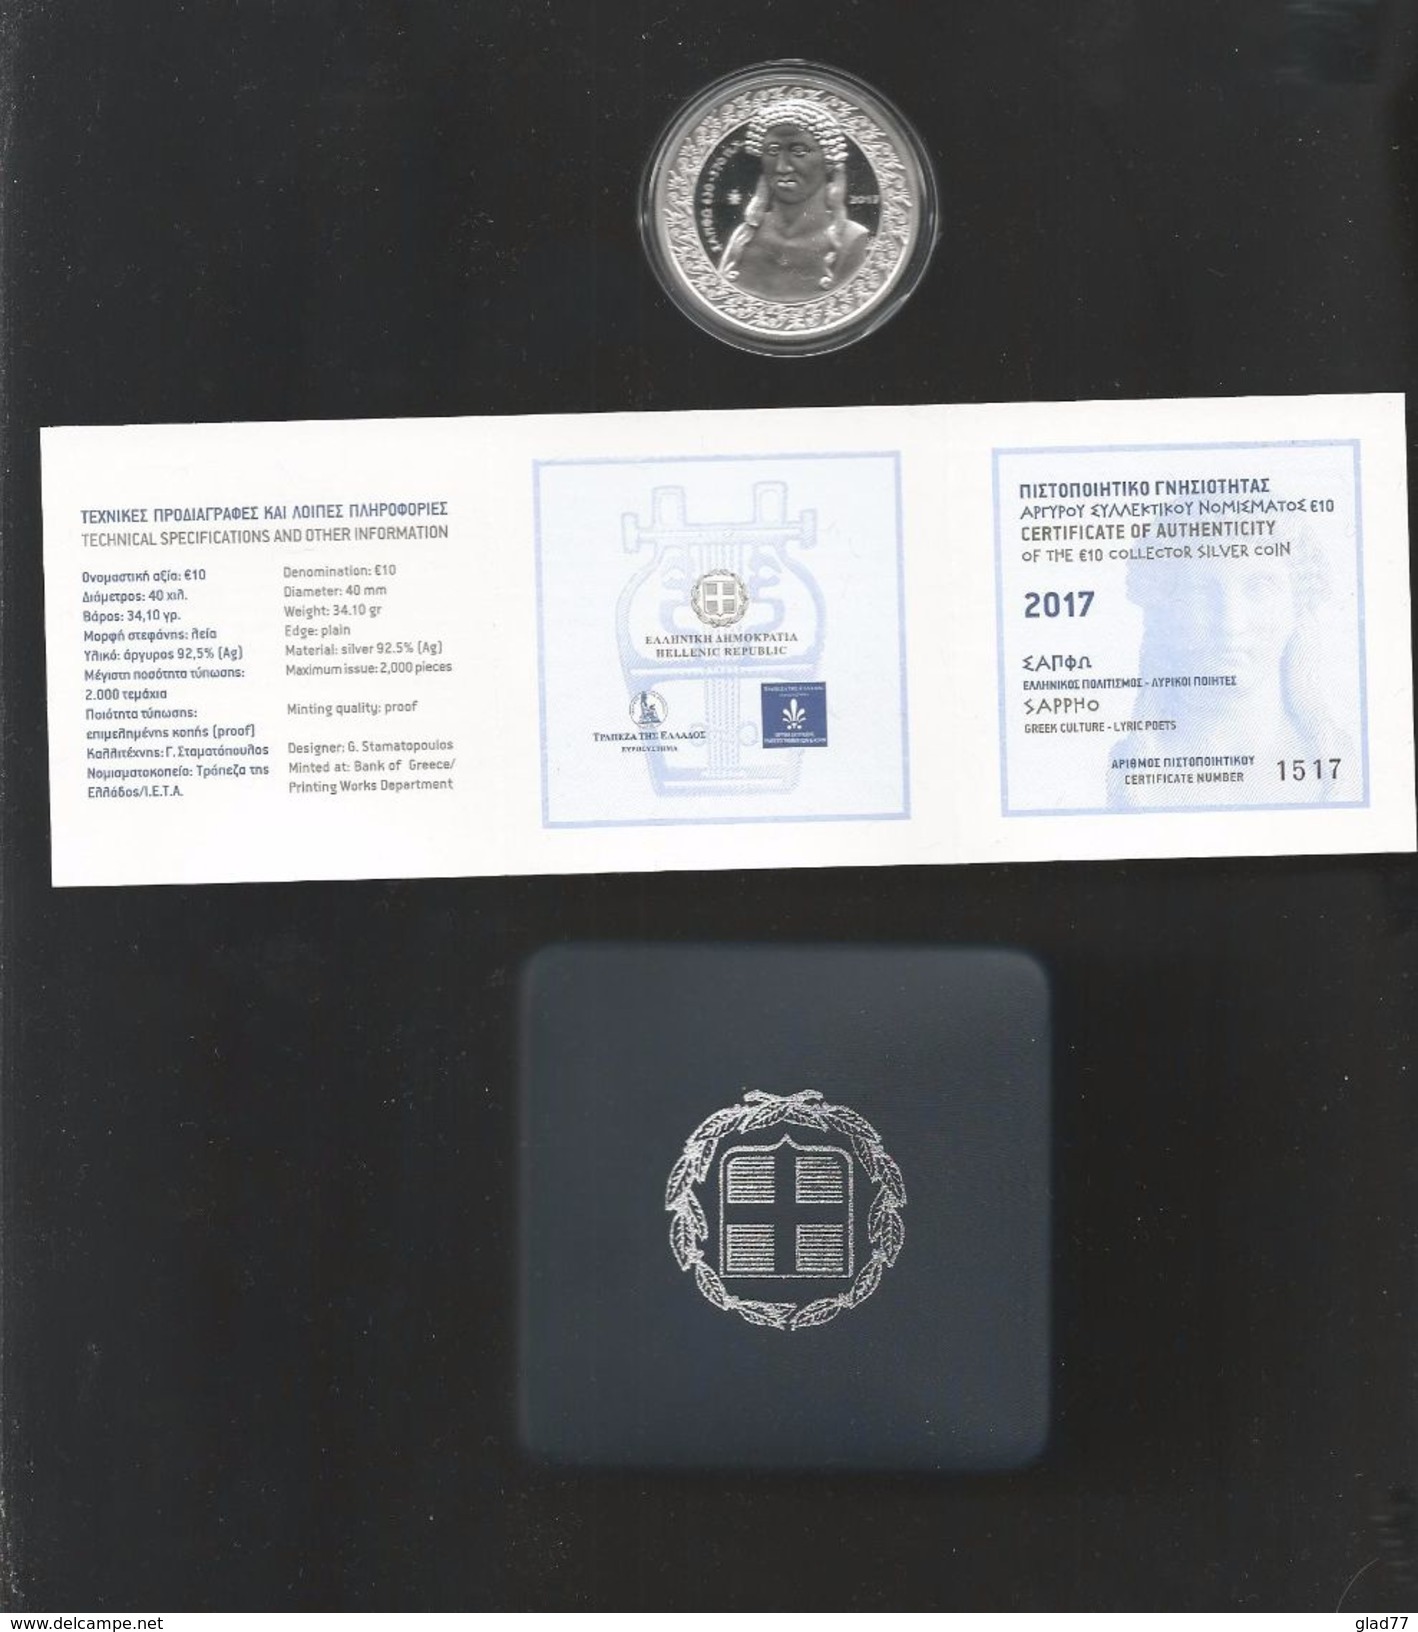 Authentic-Original-Official Issue 10 EURO Silver Proof Coin "SAPPHO" New Issue 2017 With C.O.A 1648!! - Grèce